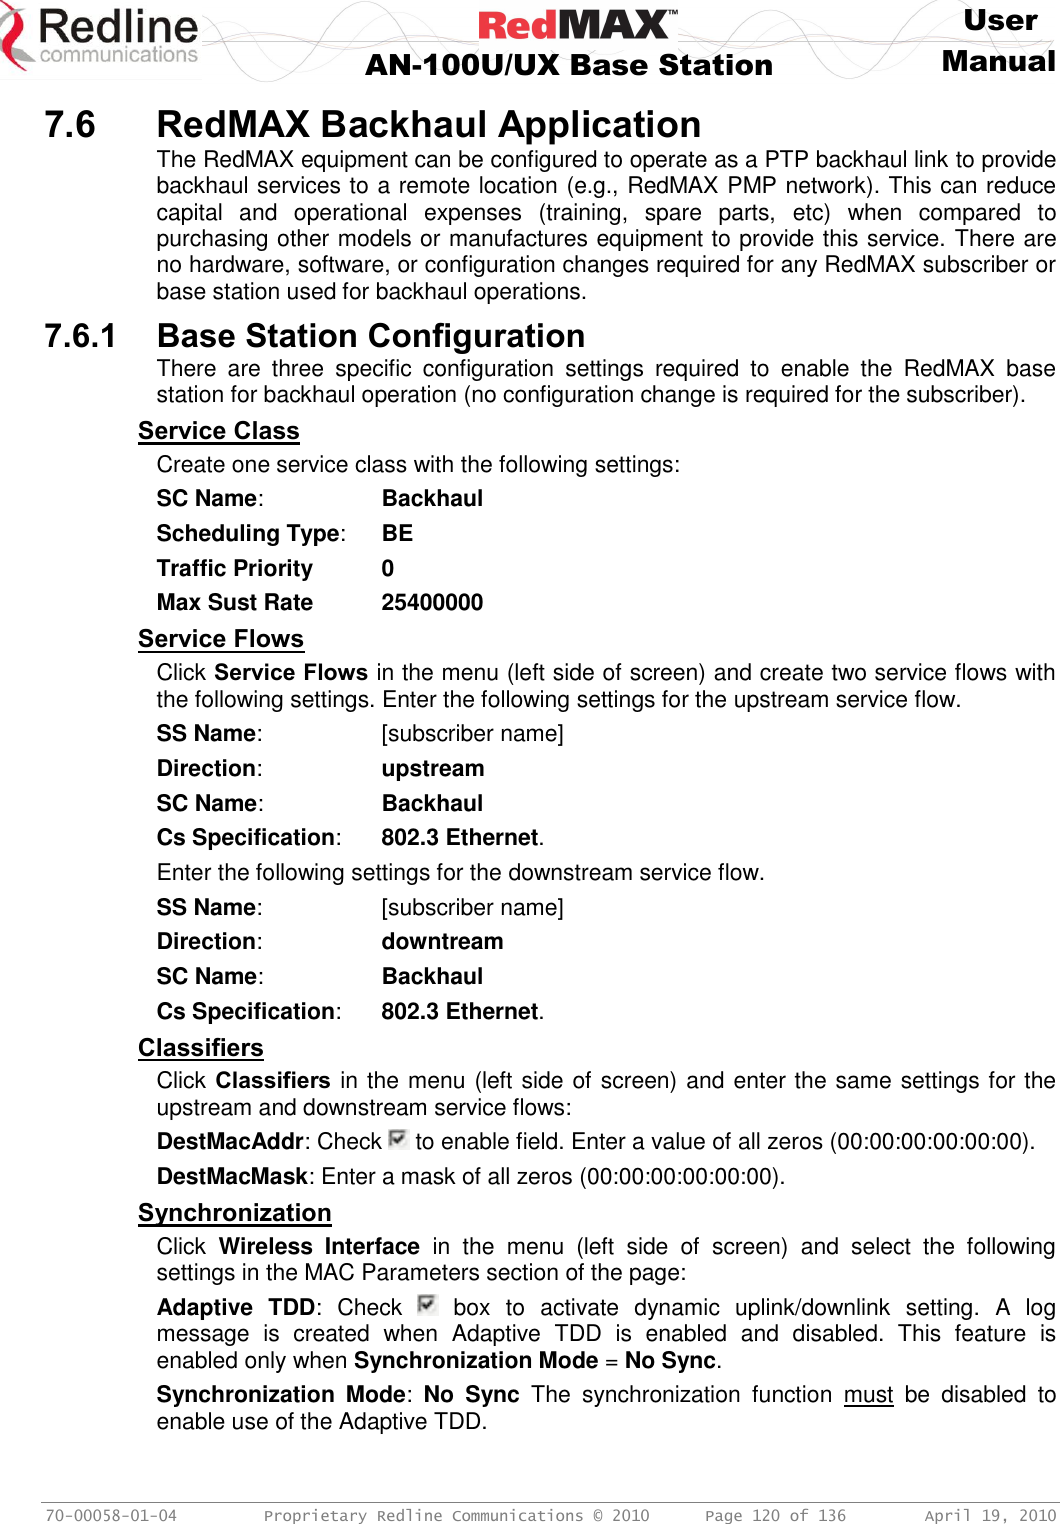     User  AN-100U/UX Base Station Manual   70-00058-01-04  Proprietary Redline Communications © 2010   Page 120 of 136  April 19, 2010 7.6 RedMAX Backhaul Application The RedMAX equipment can be configured to operate as a PTP backhaul link to provide backhaul services to a remote location (e.g., RedMAX PMP network). This can reduce capital  and  operational  expenses  (training,  spare  parts,  etc)  when  compared  to purchasing other models or manufactures equipment to provide this service. There are no hardware, software, or configuration changes required for any RedMAX subscriber or base station used for backhaul operations. 7.6.1 Base Station Configuration There  are  three  specific  configuration  settings  required  to  enable  the  RedMAX  base station for backhaul operation (no configuration change is required for the subscriber). Service Class Create one service class with the following settings: SC Name:    Backhaul Scheduling Type:  BE Traffic Priority 0 Max Sust Rate 25400000 Service Flows Click Service Flows in the menu (left side of screen) and create two service flows with the following settings. Enter the following settings for the upstream service flow. SS Name:    [subscriber name] Direction:    upstream SC Name:    Backhaul Cs Specification:  802.3 Ethernet. Enter the following settings for the downstream service flow. SS Name:    [subscriber name] Direction:    downtream SC Name:    Backhaul Cs Specification:  802.3 Ethernet. Classifiers Click Classifiers in the menu (left side of screen) and enter the same settings for the upstream and downstream service flows: DestMacAddr: Check   to enable field. Enter a value of all zeros (00:00:00:00:00:00). DestMacMask: Enter a mask of all zeros (00:00:00:00:00:00). Synchronization Click  Wireless  Interface  in  the  menu  (left  side  of  screen)  and  select  the  following settings in the MAC Parameters section of the page: Adaptive  TDD:  Check    box  to  activate  dynamic  uplink/downlink  setting.  A  log message  is  created  when  Adaptive  TDD  is  enabled  and  disabled.  This  feature  is enabled only when Synchronization Mode = No Sync. Synchronization  Mode:  No  Sync  The  synchronization  function  must  be  disabled  to enable use of the Adaptive TDD. 